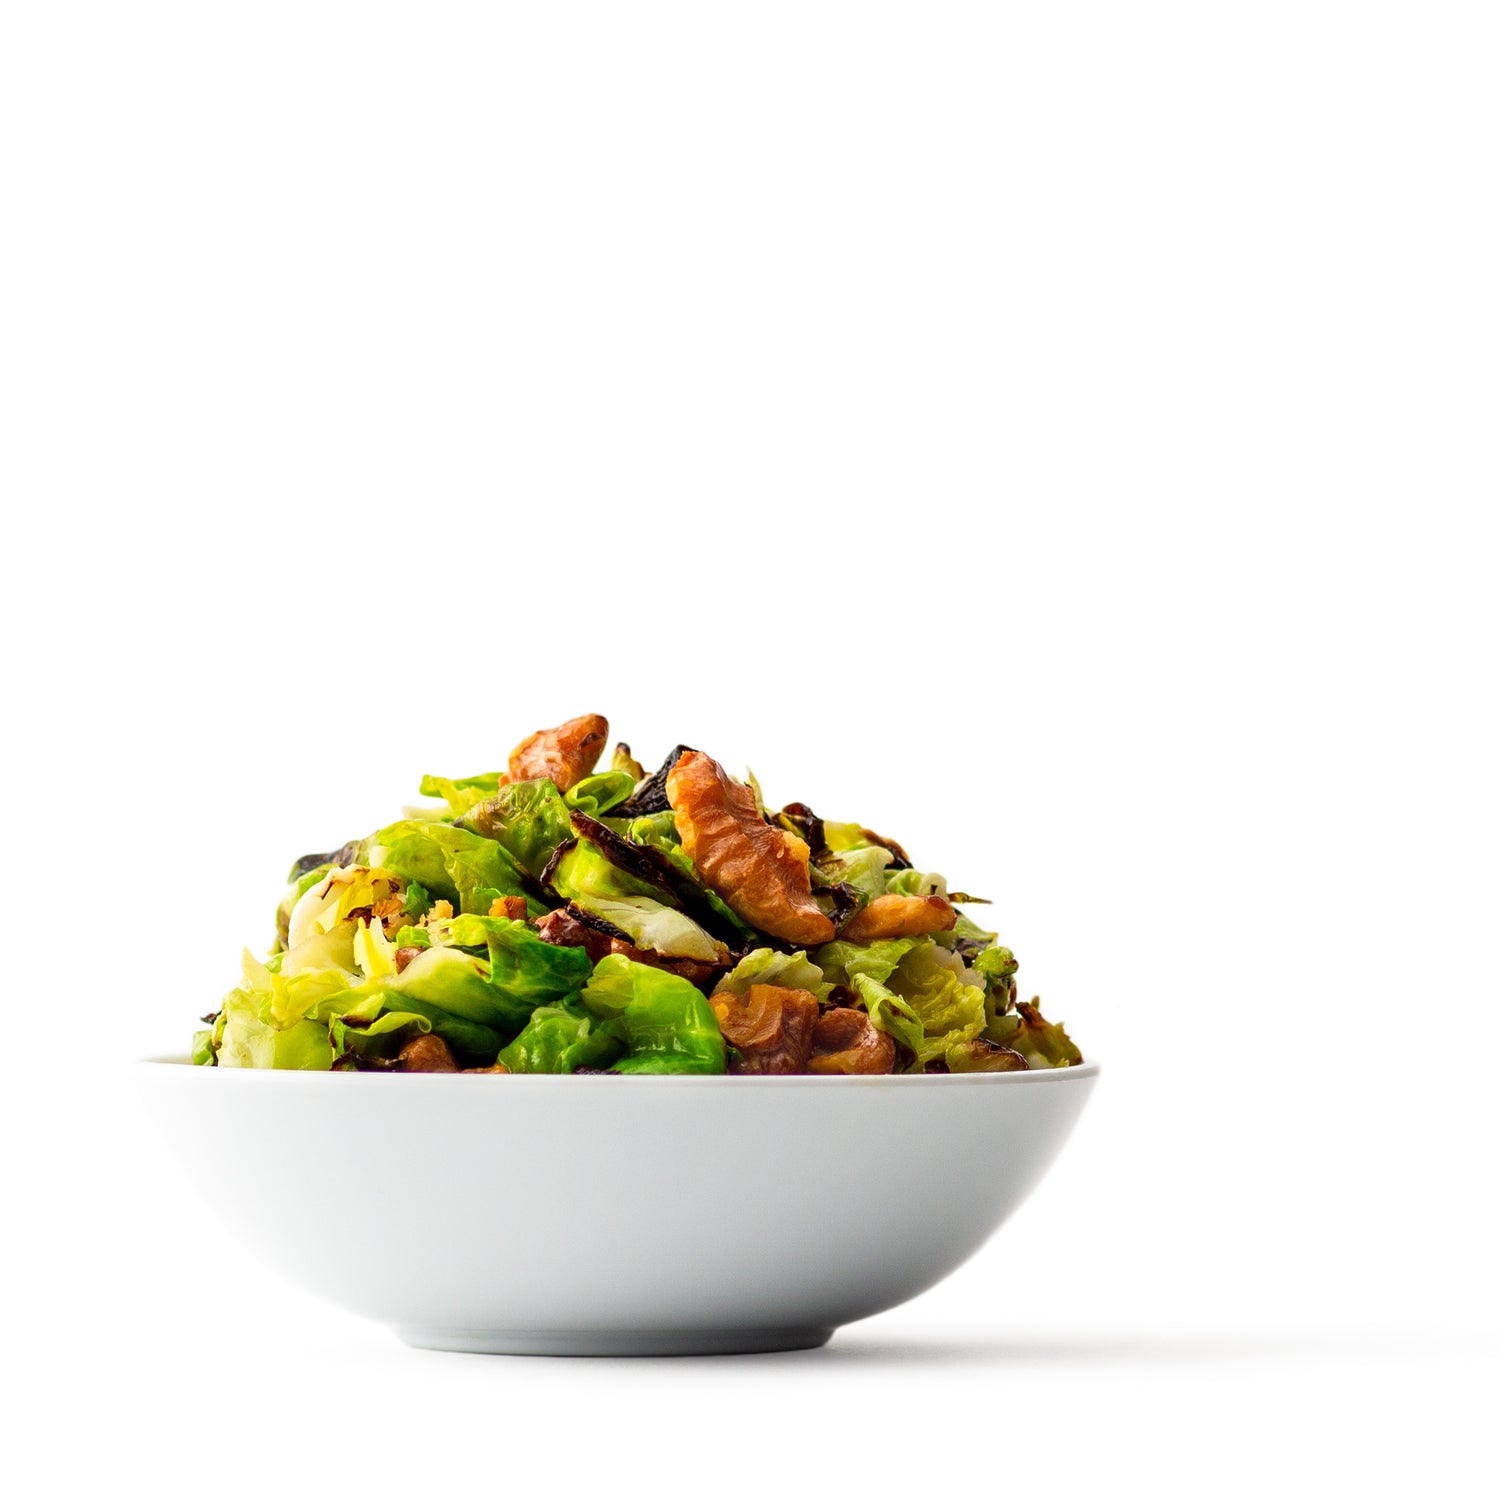 brussel sprouts and walnuts tossed together in a white bowl